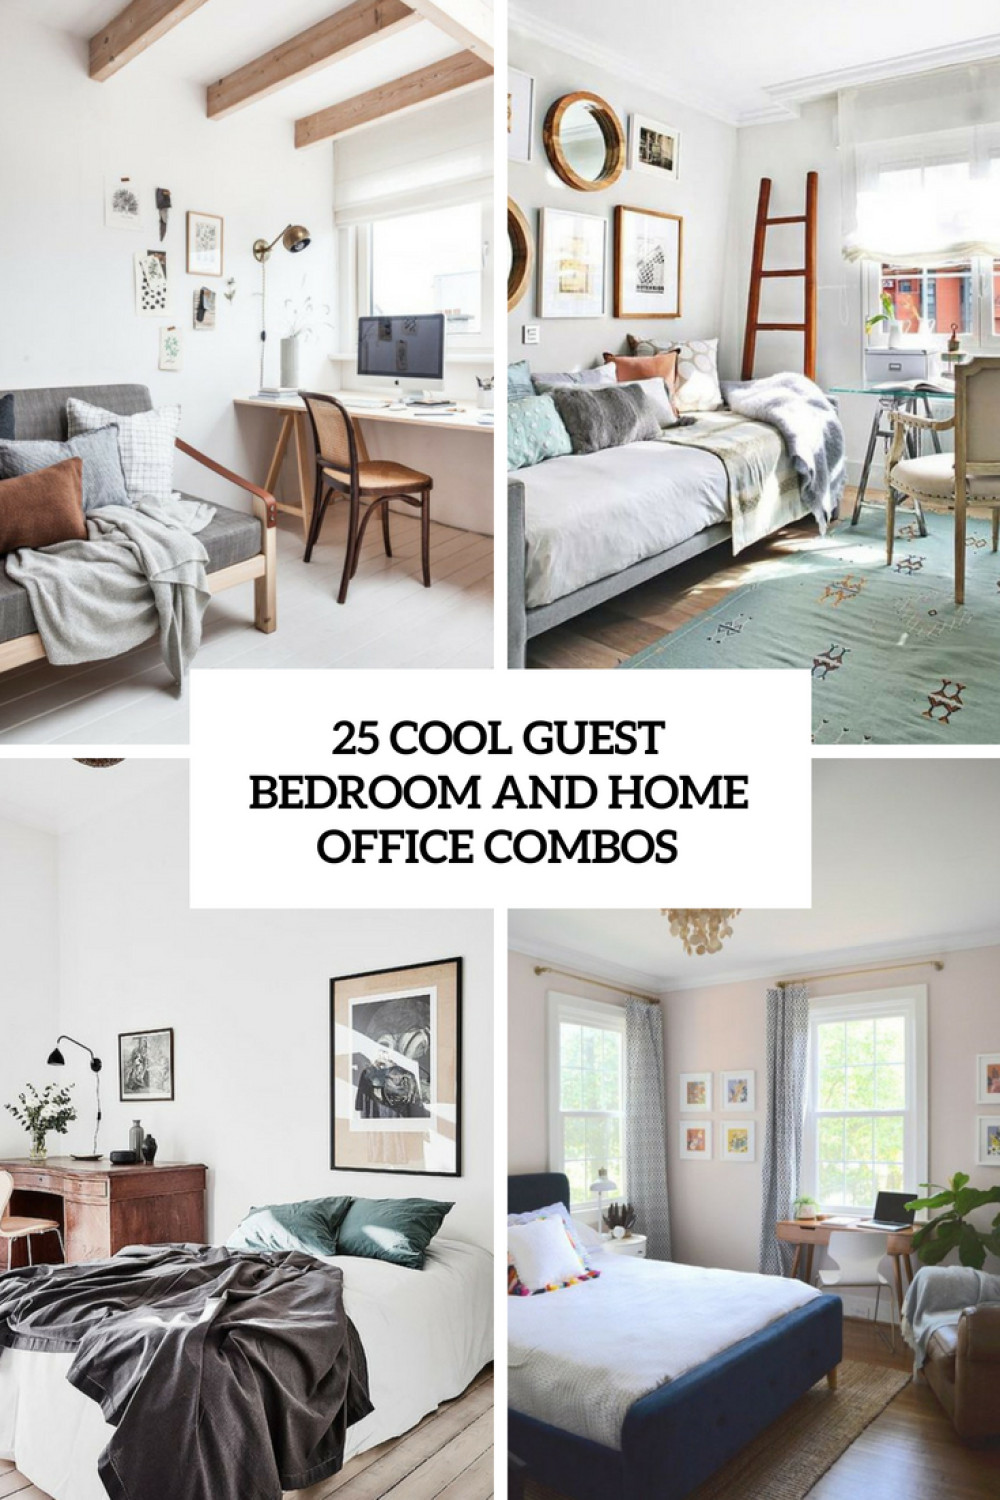 Cool Guest Bedroom And Home Office Combos - DigsDigs